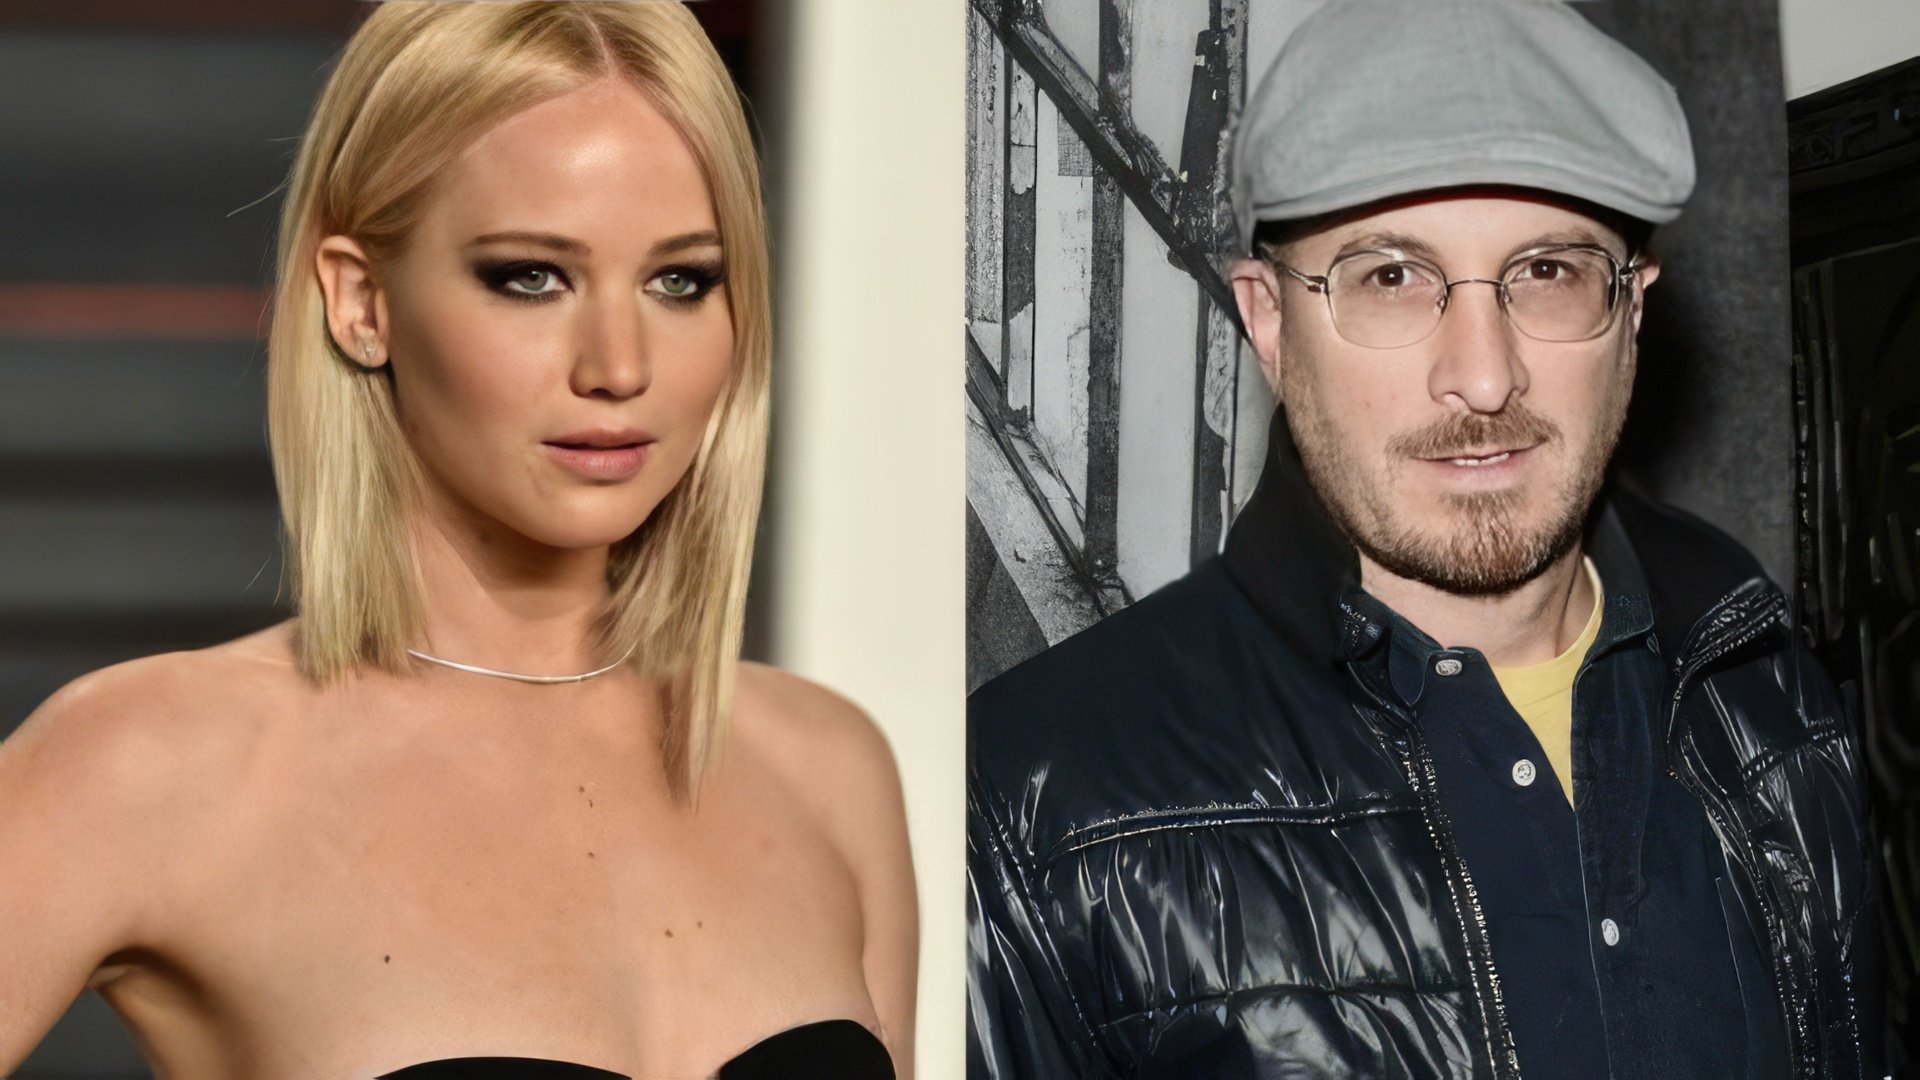 There's a 21-year difference between Jennifer Lawrence and Darren Aronofsky